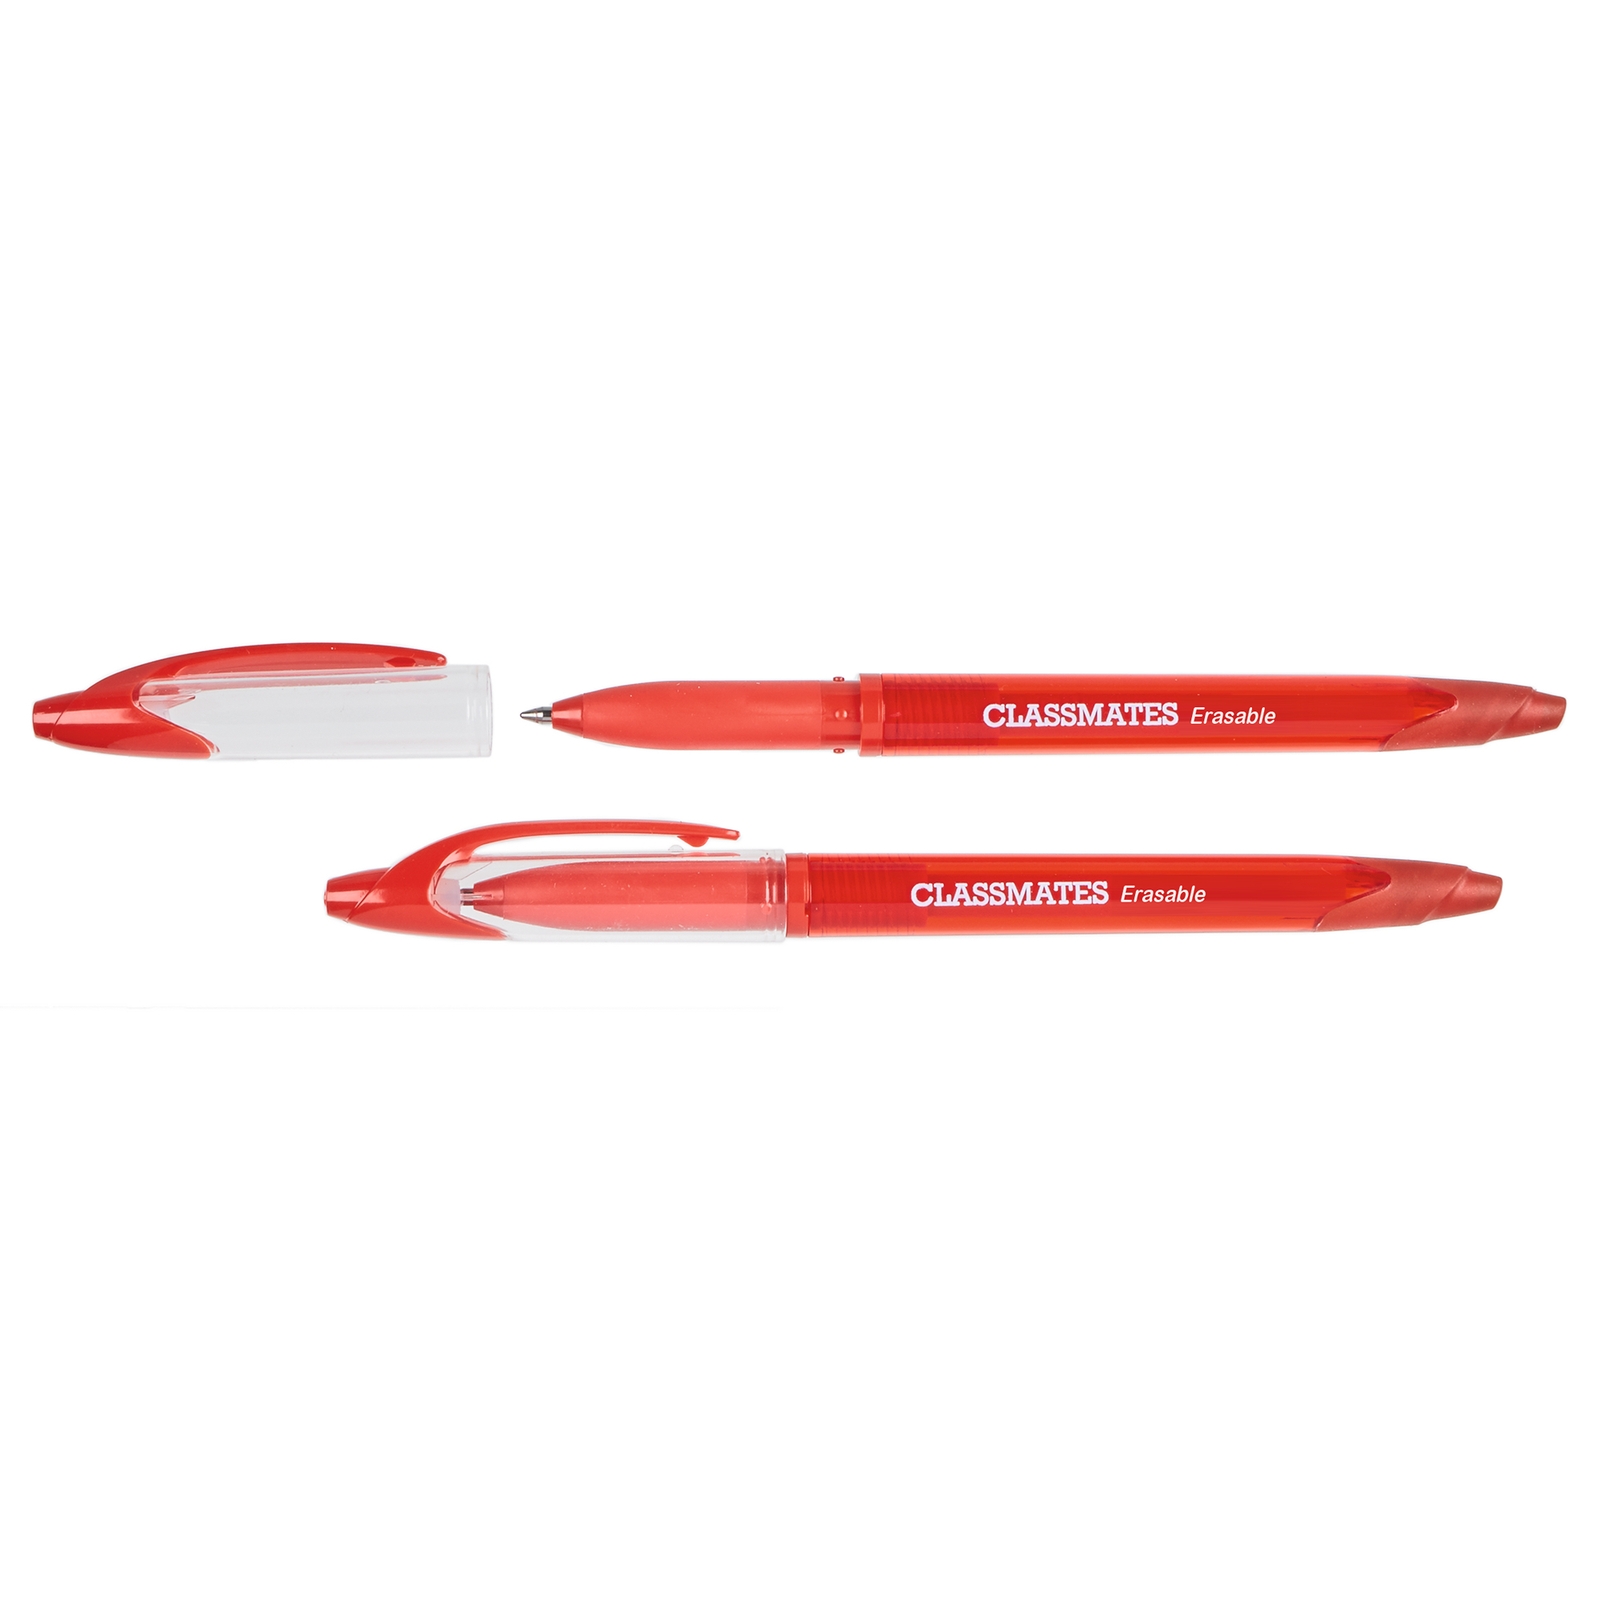 Classmates Erasable Rollerball Pen - Red, Pack of 12